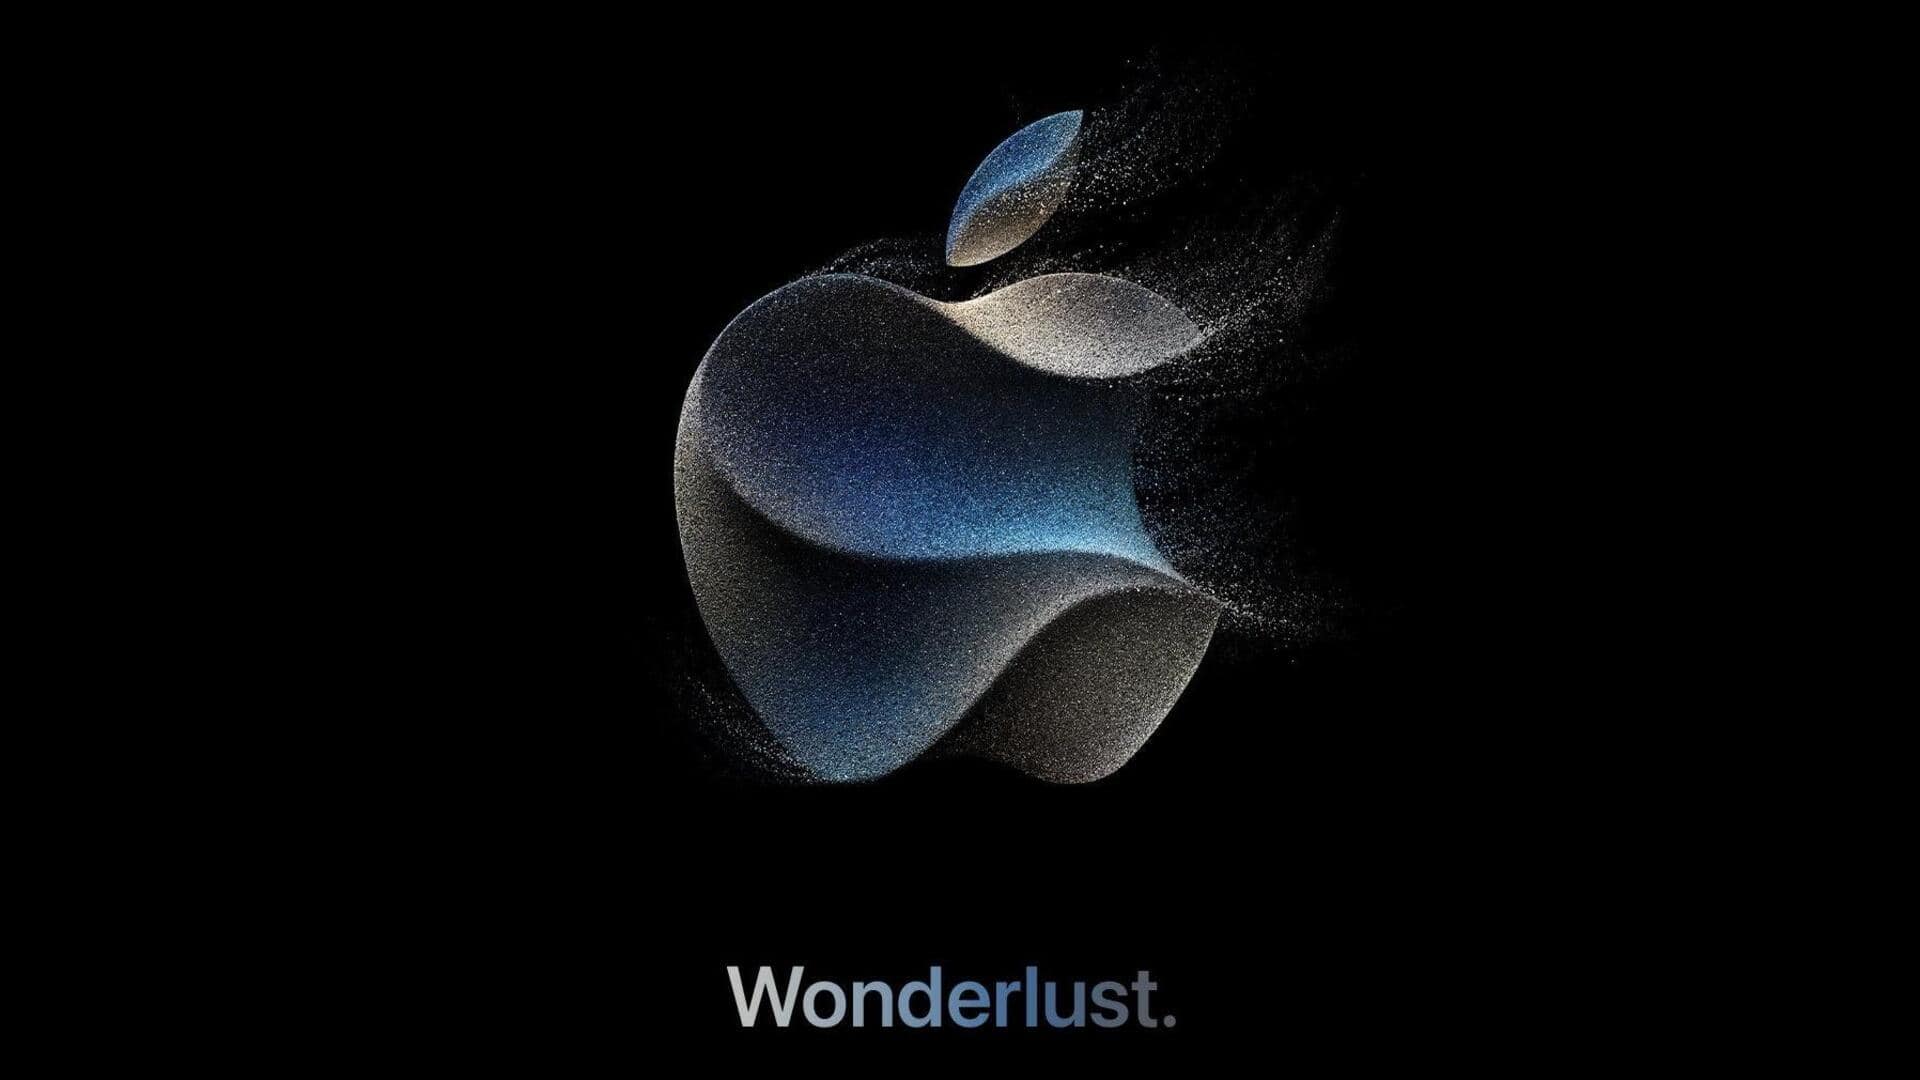 Apple's 'Wonderlust' event scheduled for September 12: What to expect